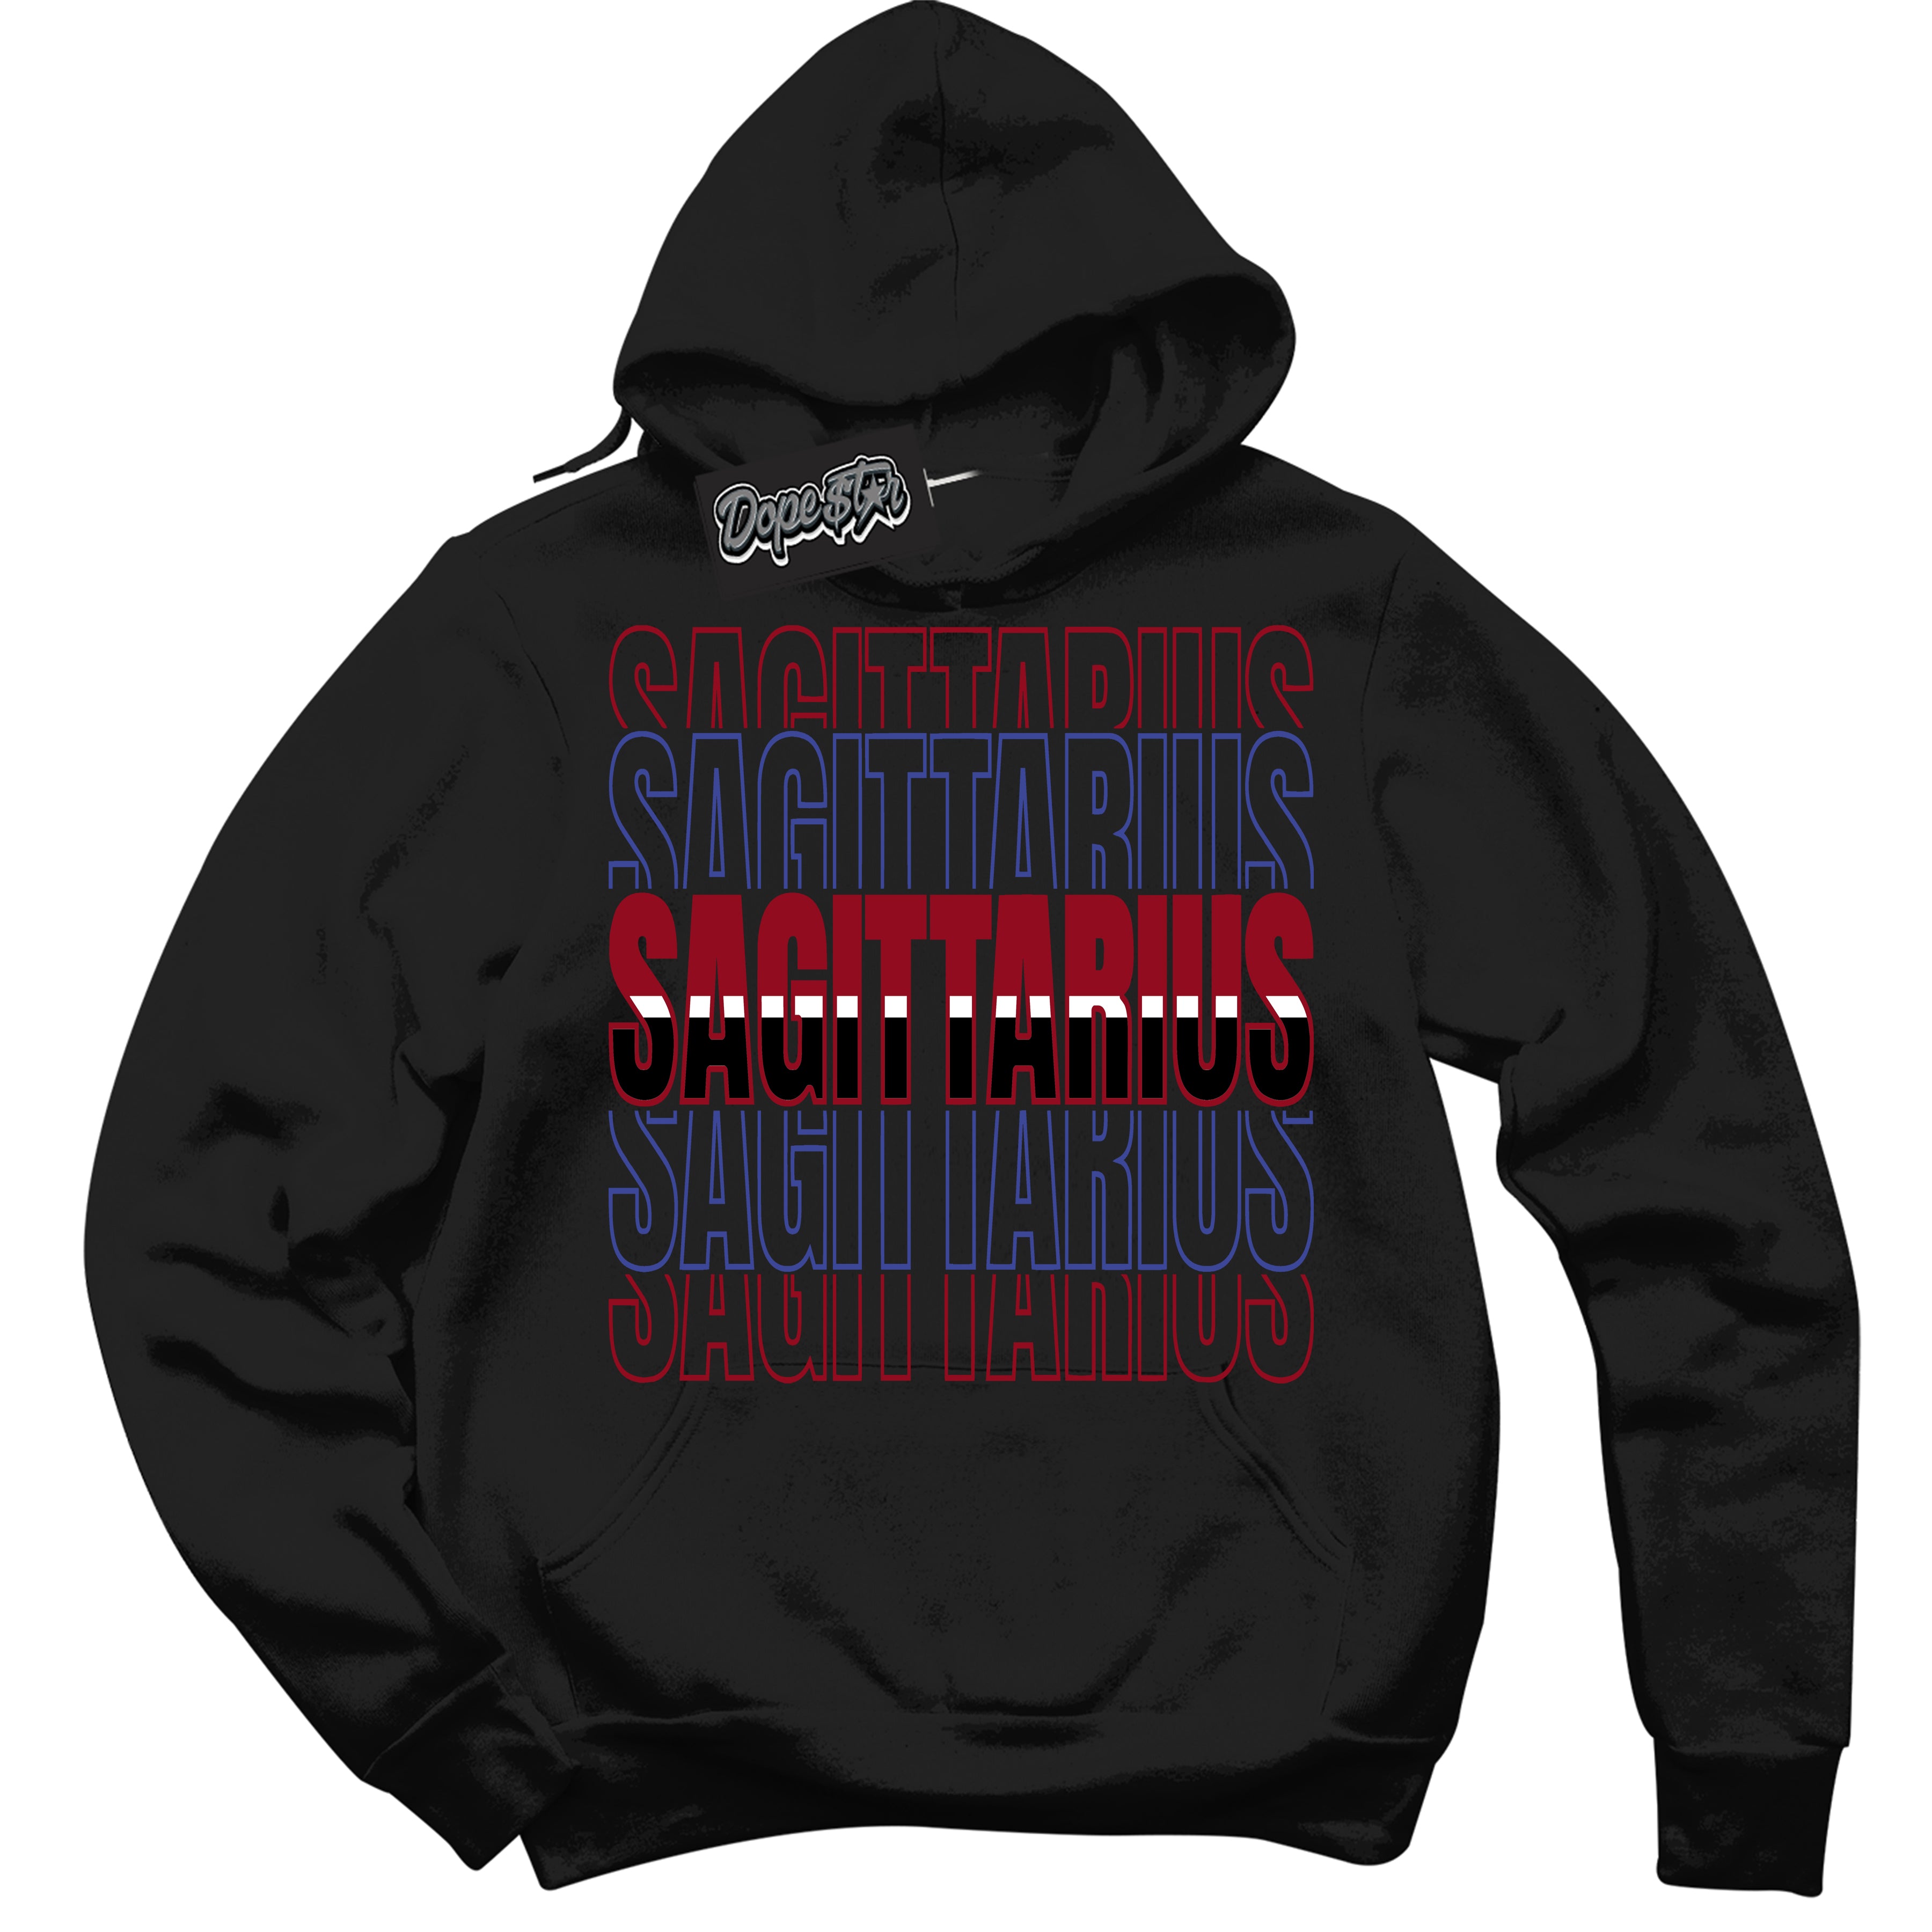 Cool Black Hoodie with “ Sagittarius ”  design that Perfectly Matches Playoffs 8s Sneakers.